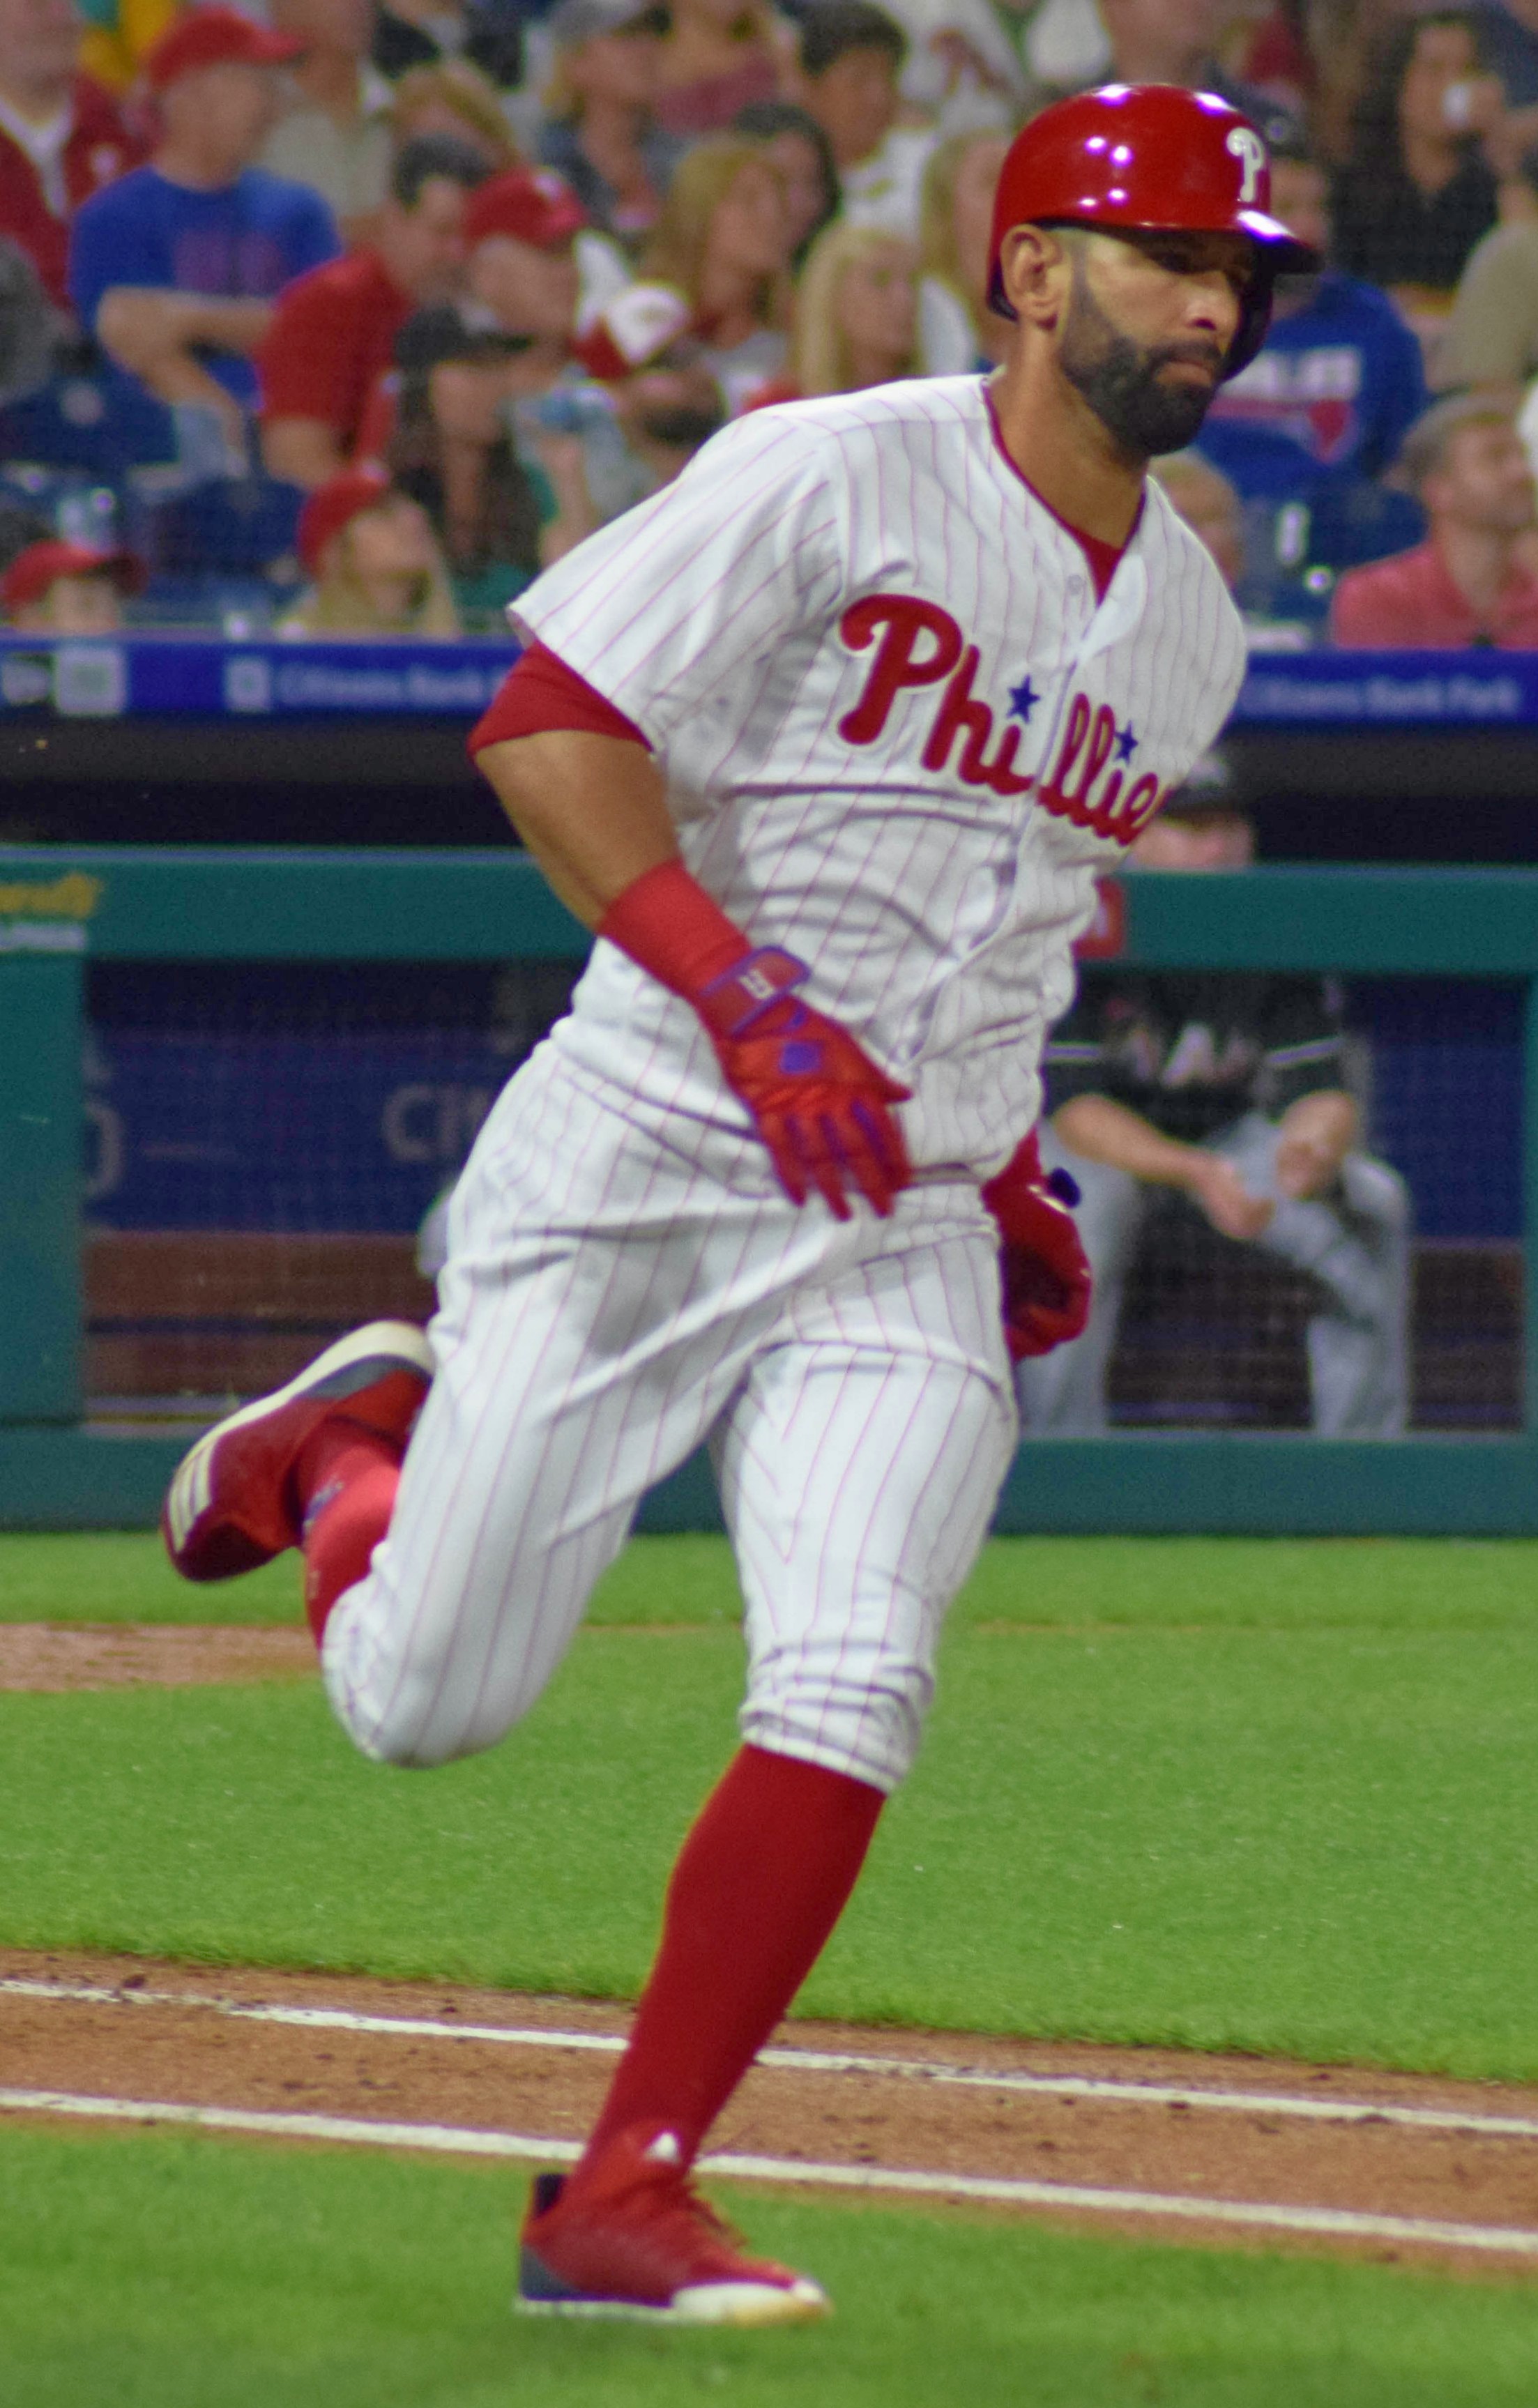 File:José Bautista with Phillies (Cropped).jpg - Wikimedia Commons